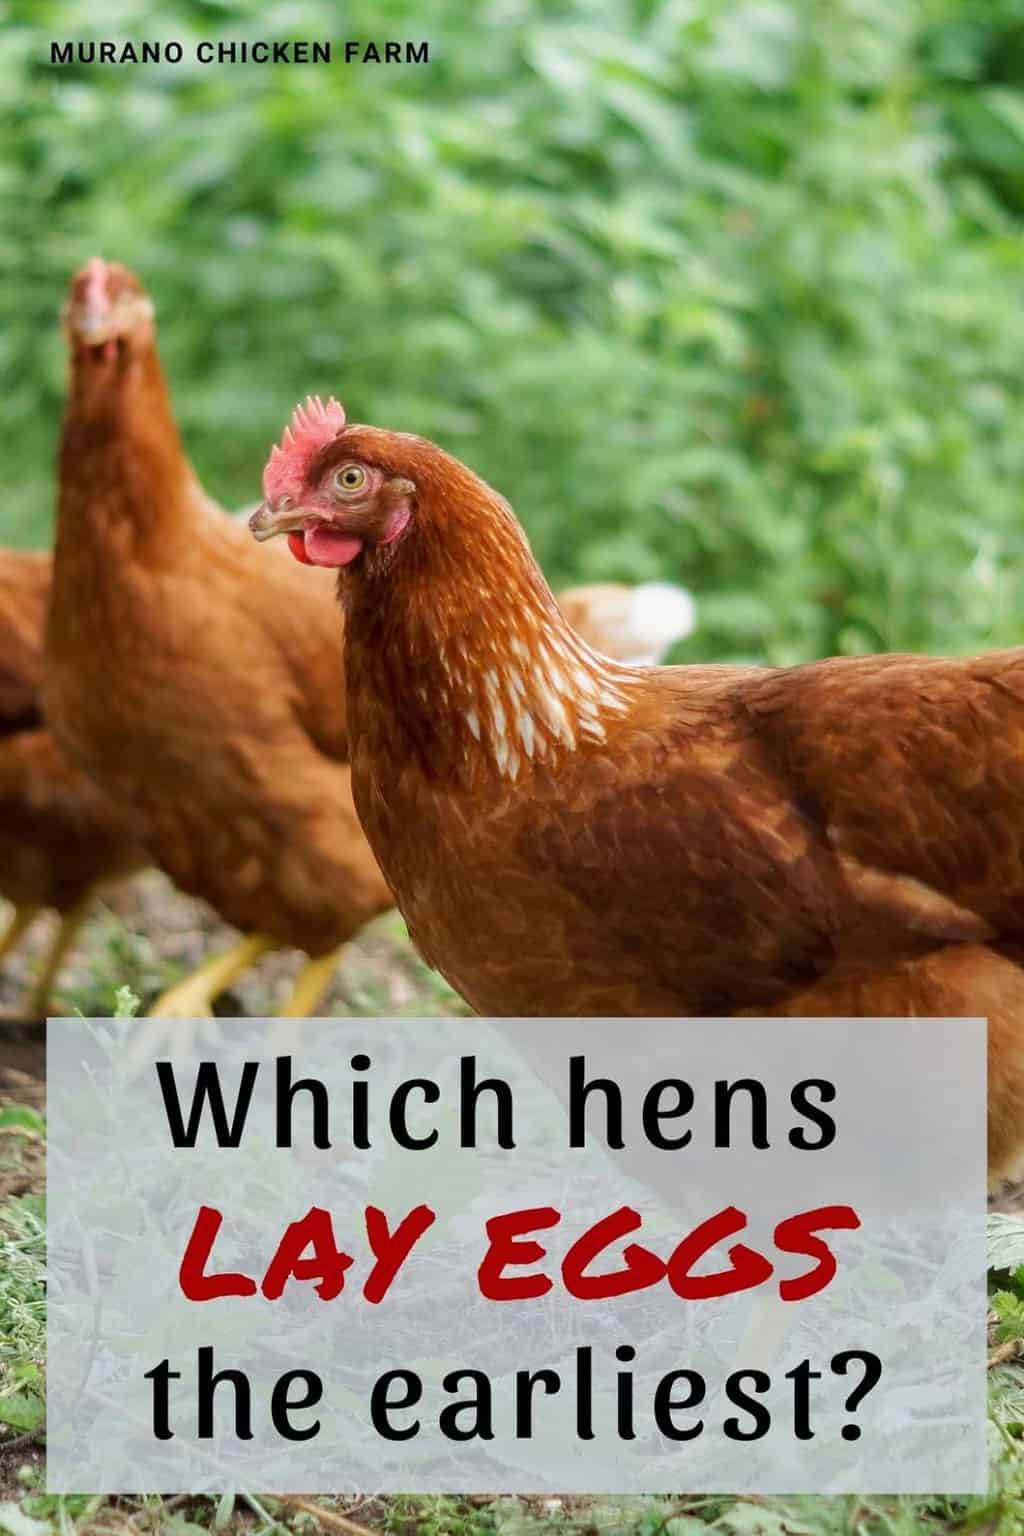 When Do Chickens Lay Their Eggs?